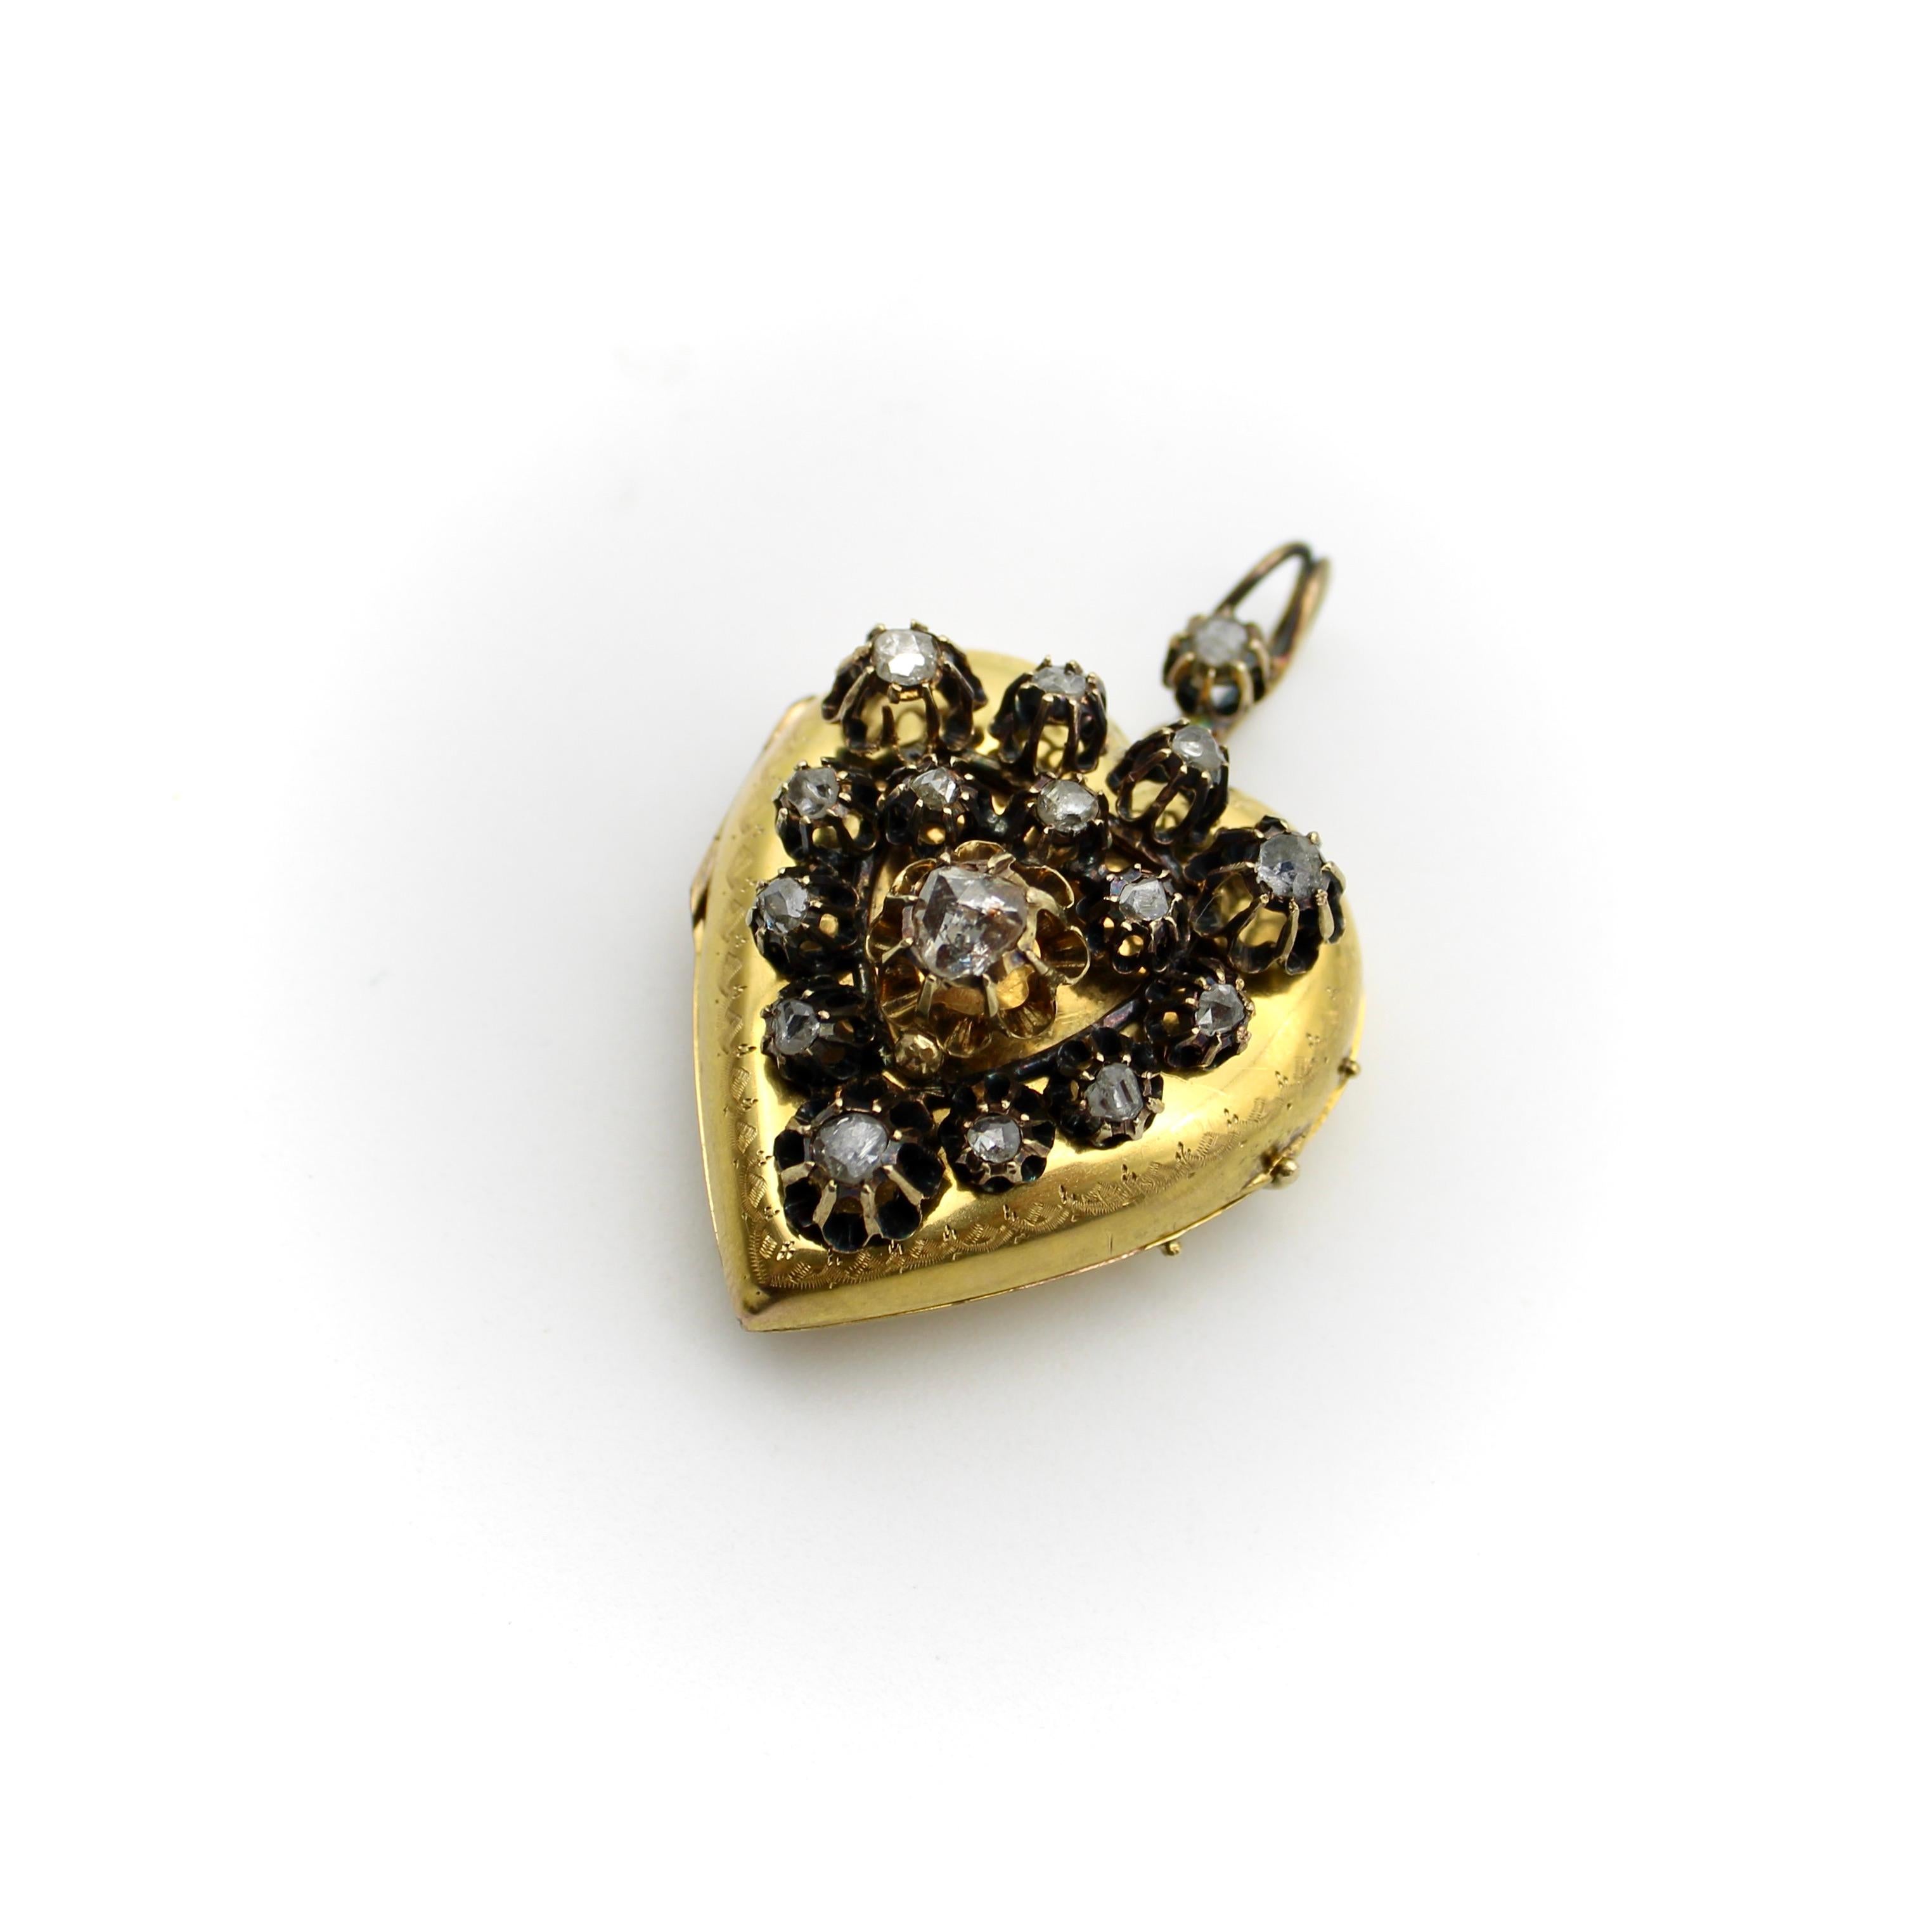 Circa 1880, this heart shaped locket is encrusted with rose cut diamonds, held up by tall buttercup prongs. The prongs are connected as a mount, separate from the locket, which has been riveted onto the piece. The dark patina of the mount creates an